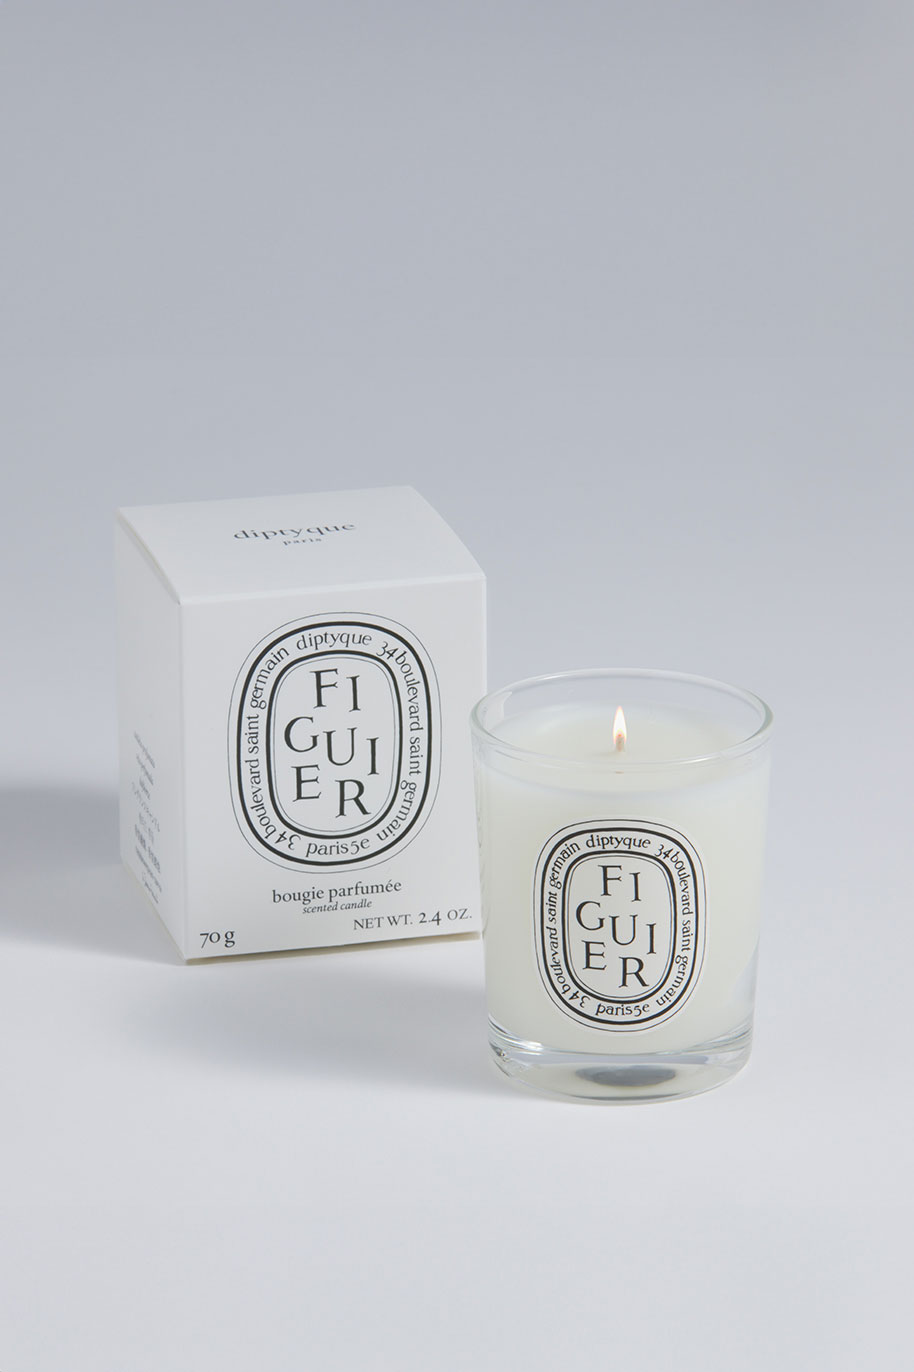 Diptyque for The Ritz-Carlton Figuier/Fig Tree Glass Candle Image